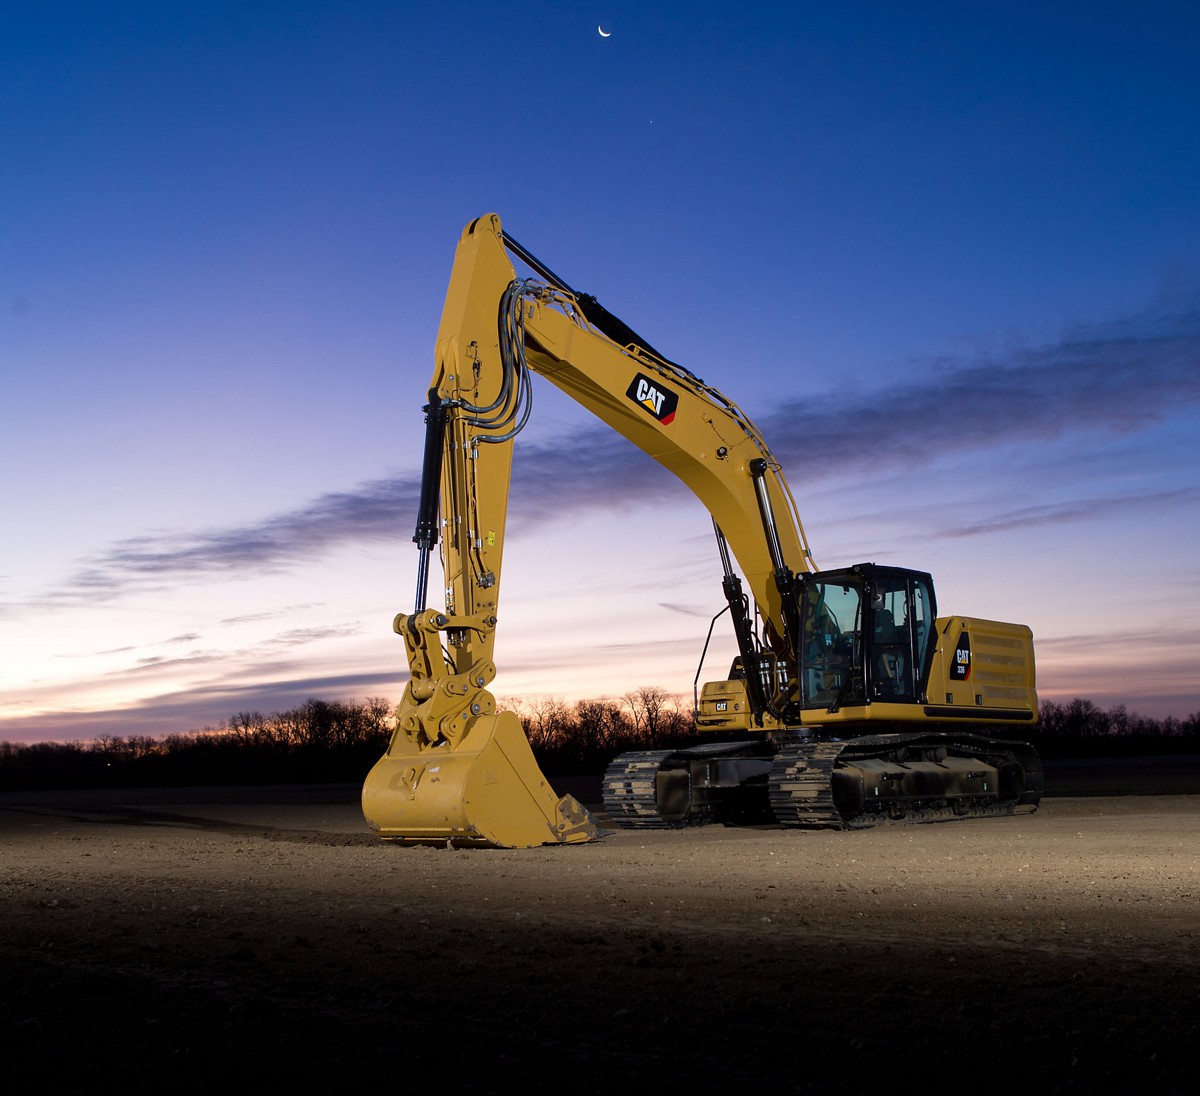 Next generation Cat Excavators deliver efficiency and lower operating costs in 36-ton size class